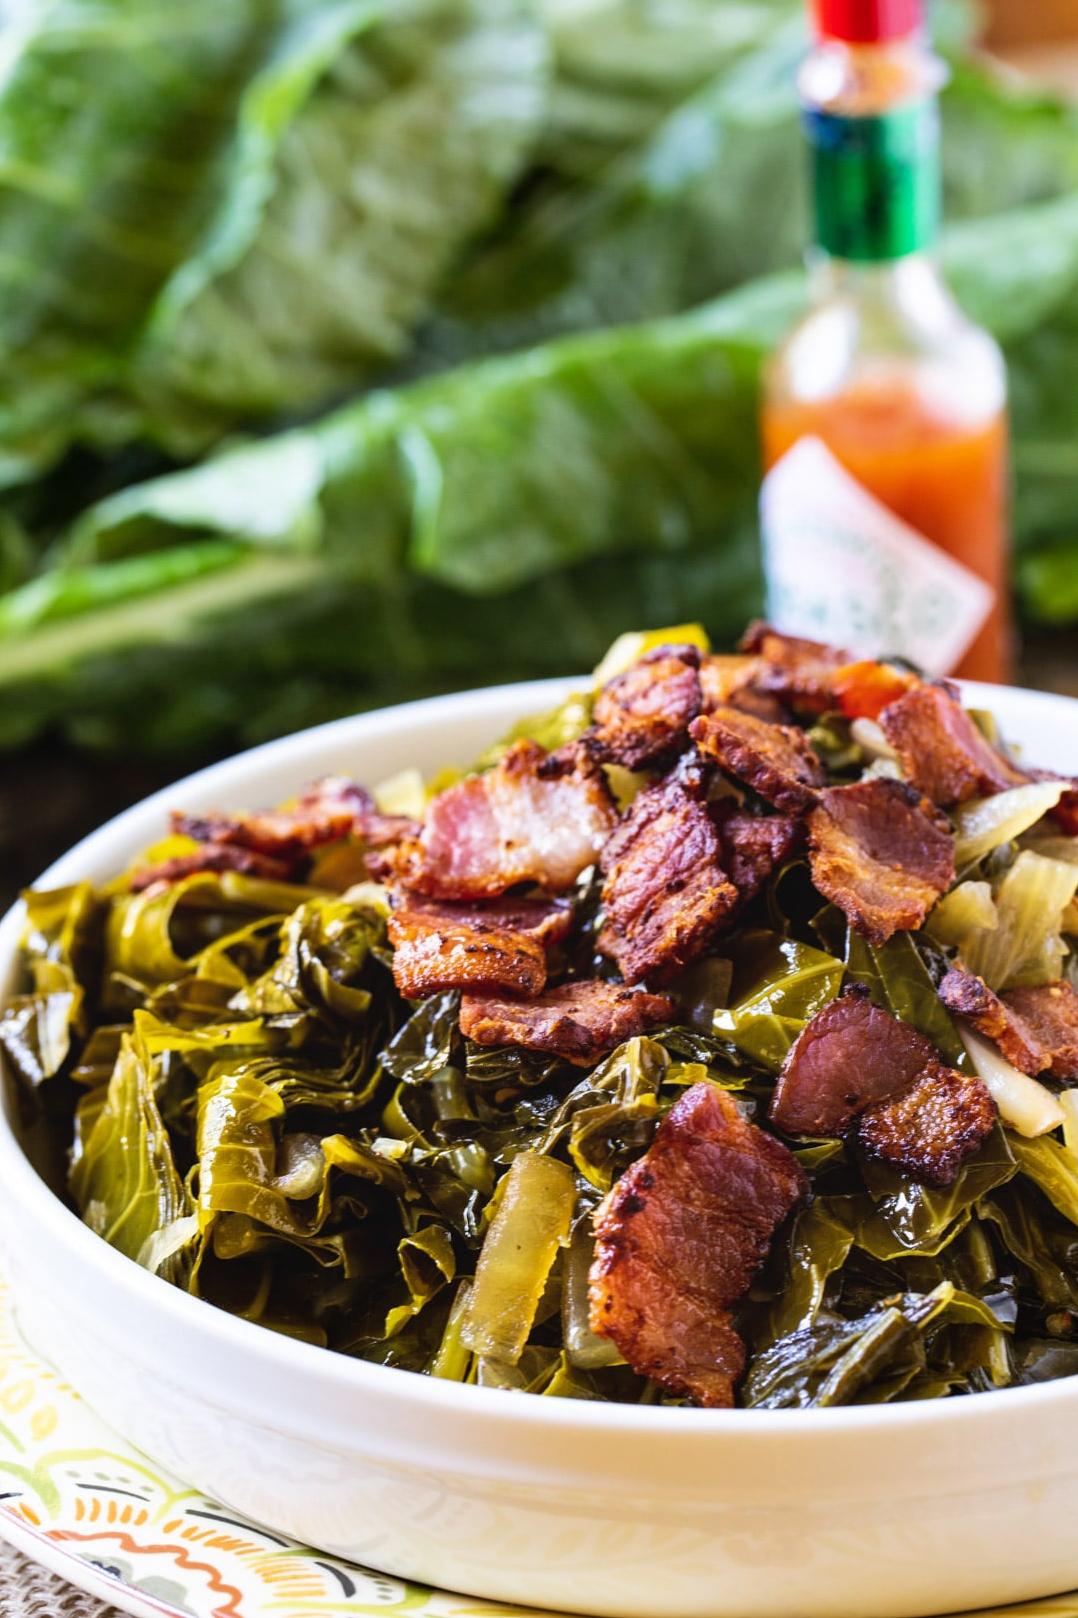  Get your greens in with a bit of spice